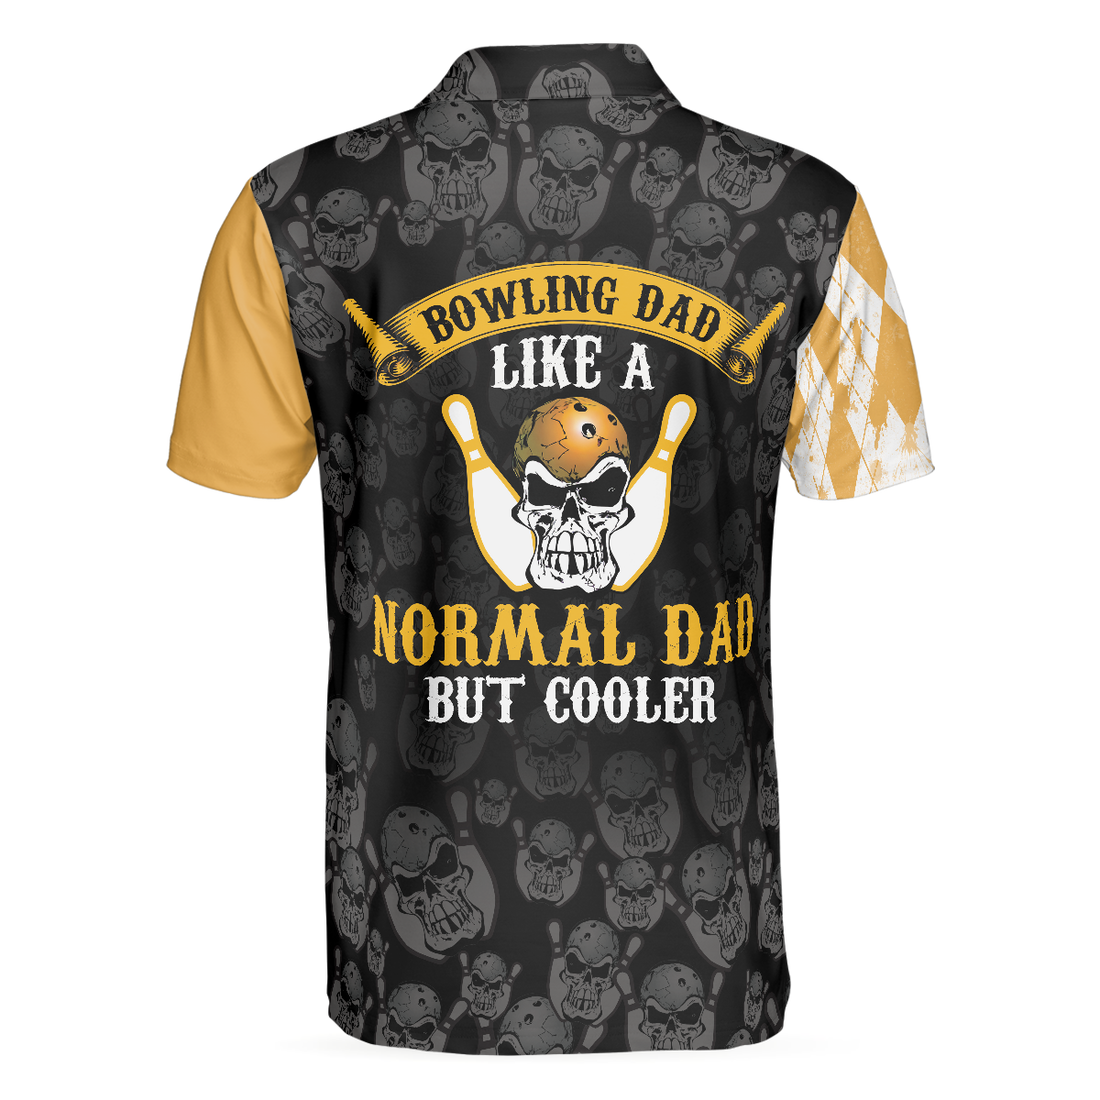 Bowling Dad Like A Normal Dad But Cooler Polo Shirt Argyle Pattern Bowling Polo Shirt For Bowler Dad - 1